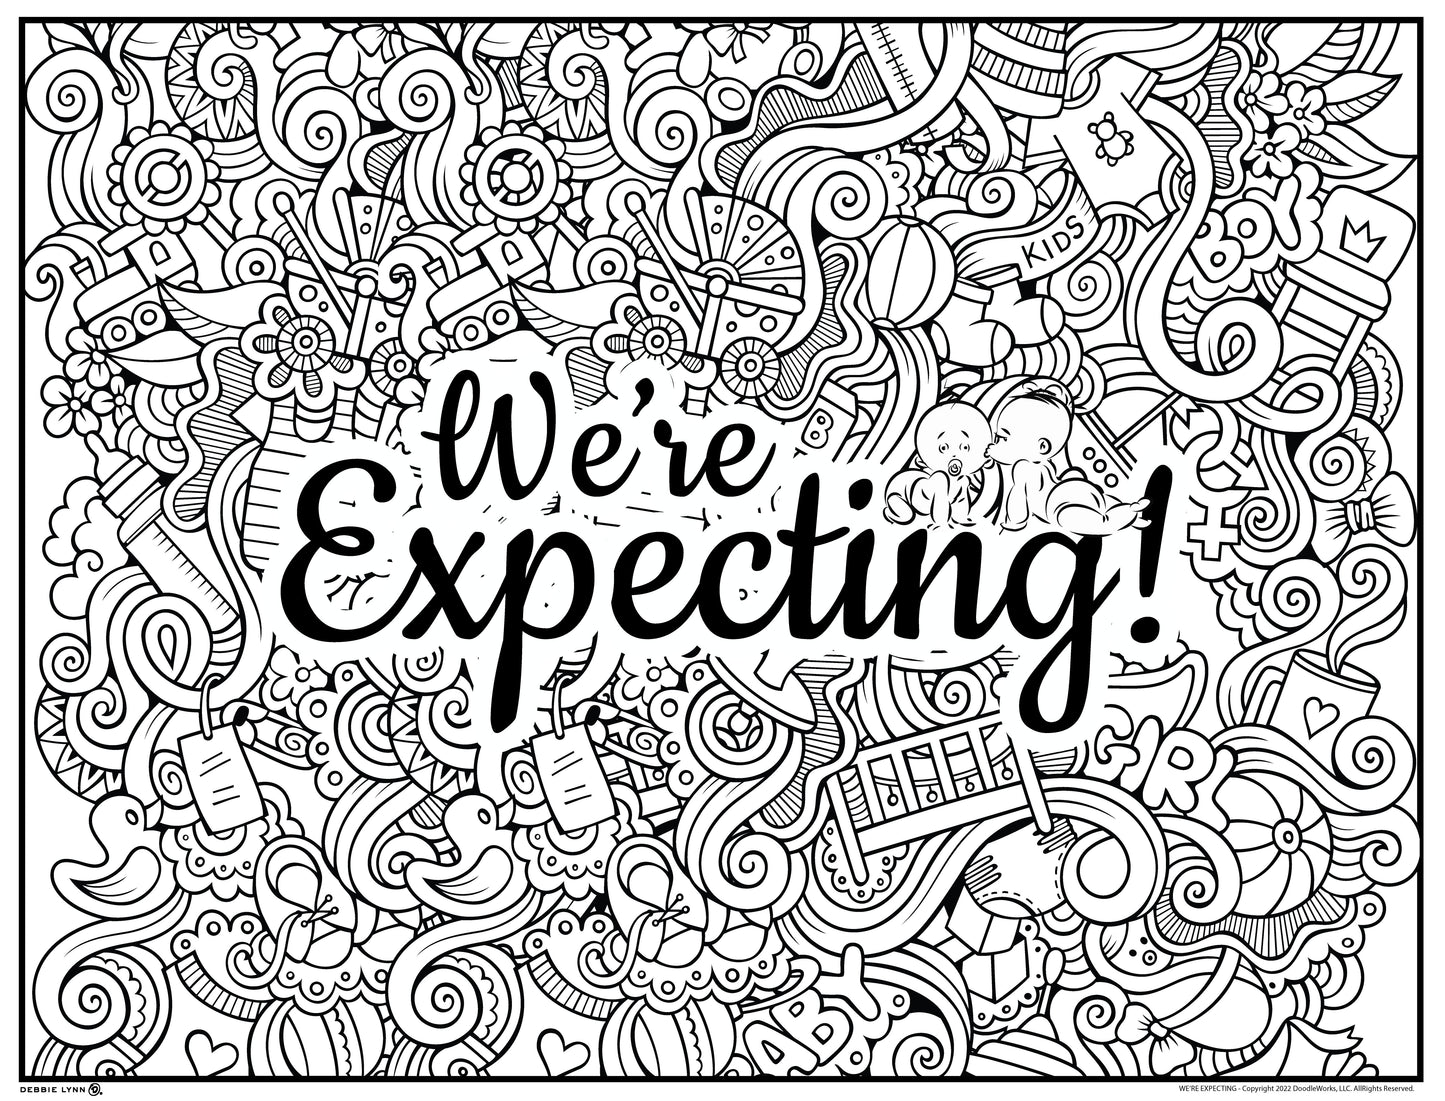 We're Expecting! Baby Announcement Huge Coloring Poster 46" x 60"